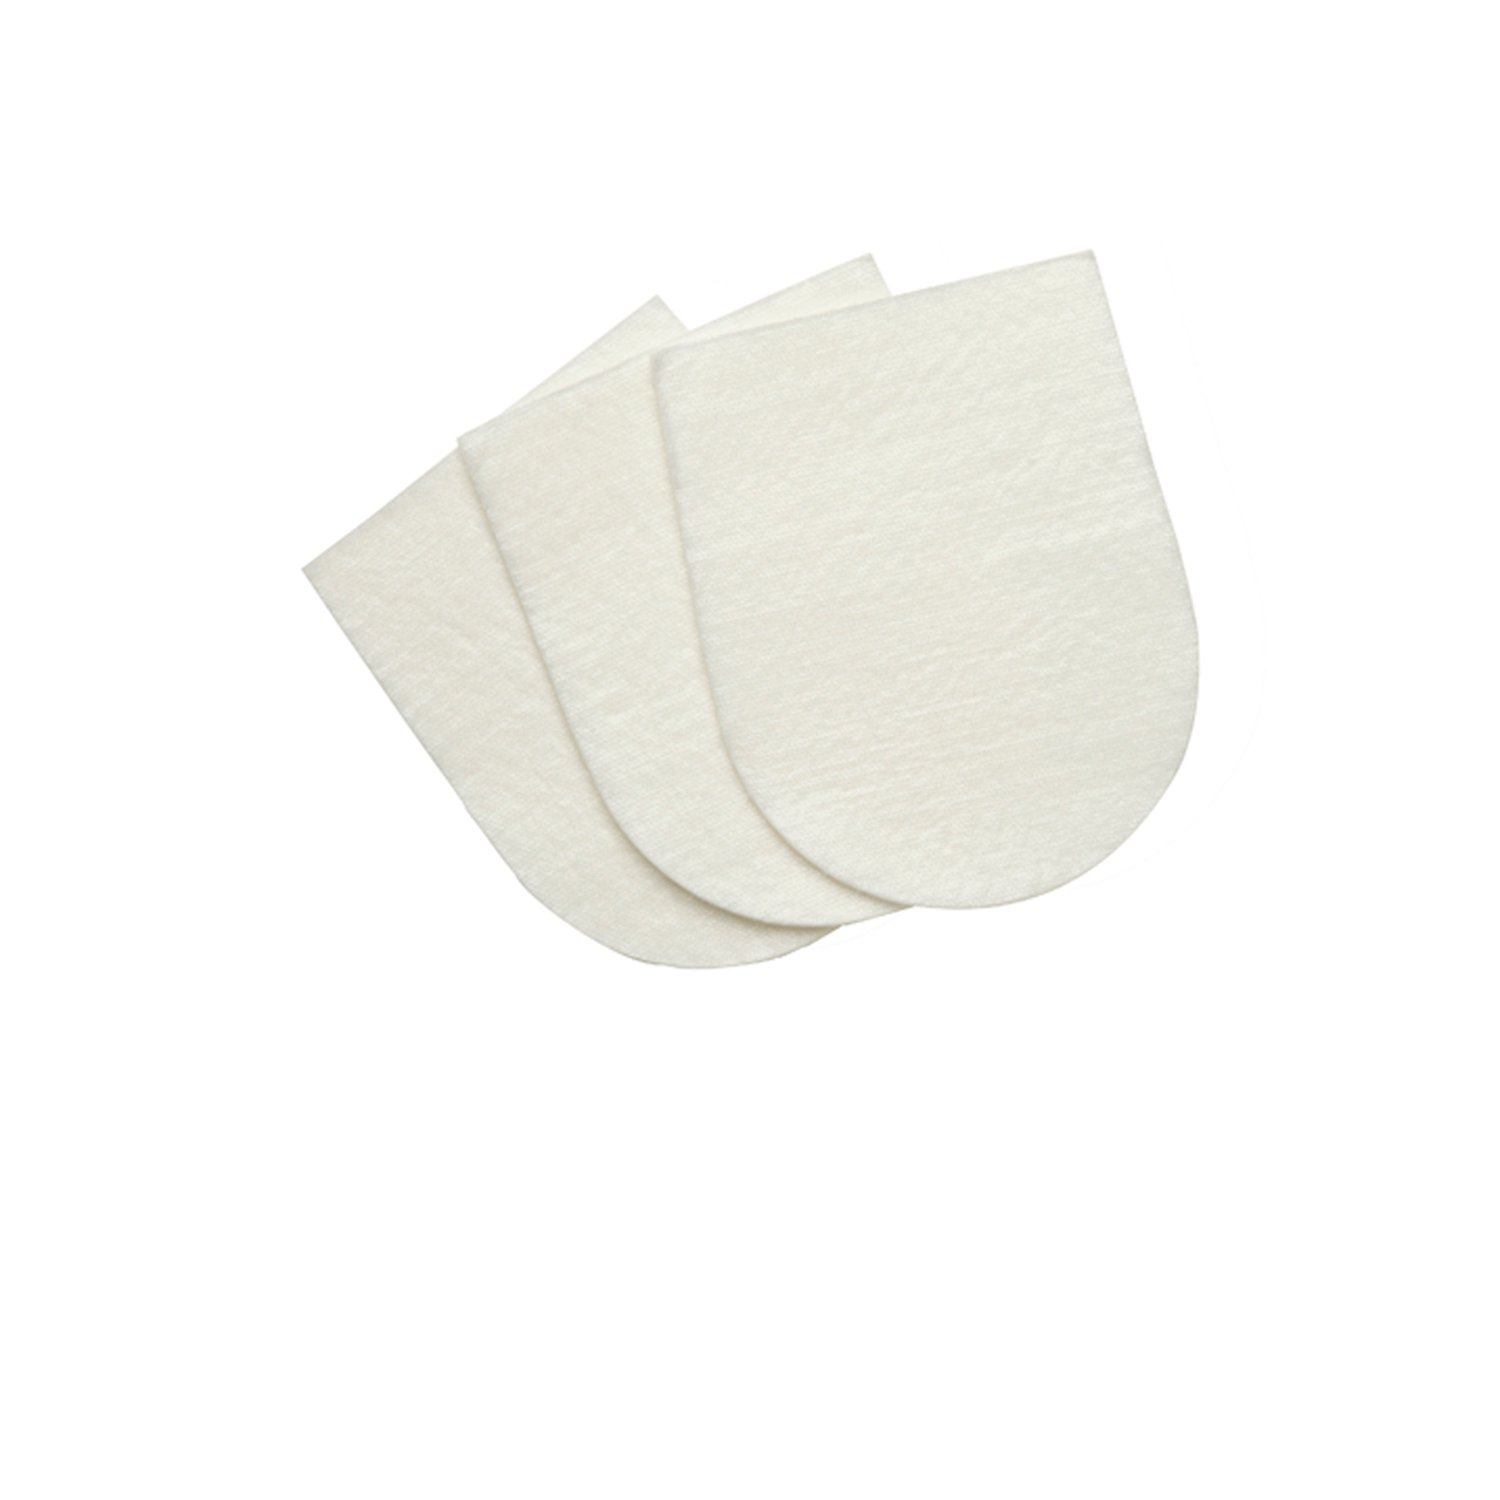 Dog & Pet Bandages: Liquid Bandages & More for Dogs | Petco